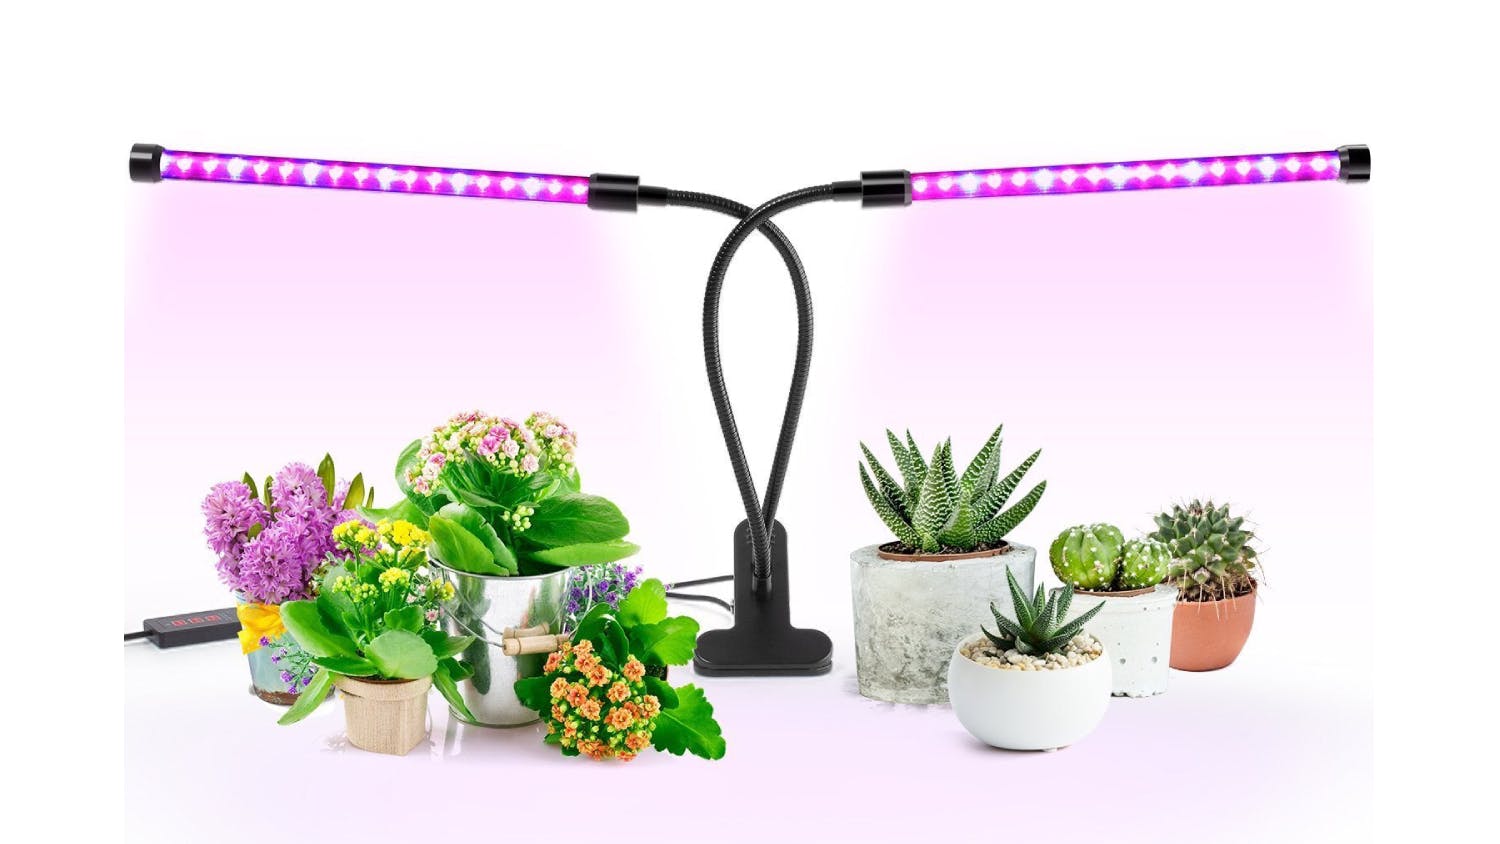 Kmall Dual-Head Flexible Clip-On LED Plant Grow Light with Brightness/Colour Adjustment, Timer